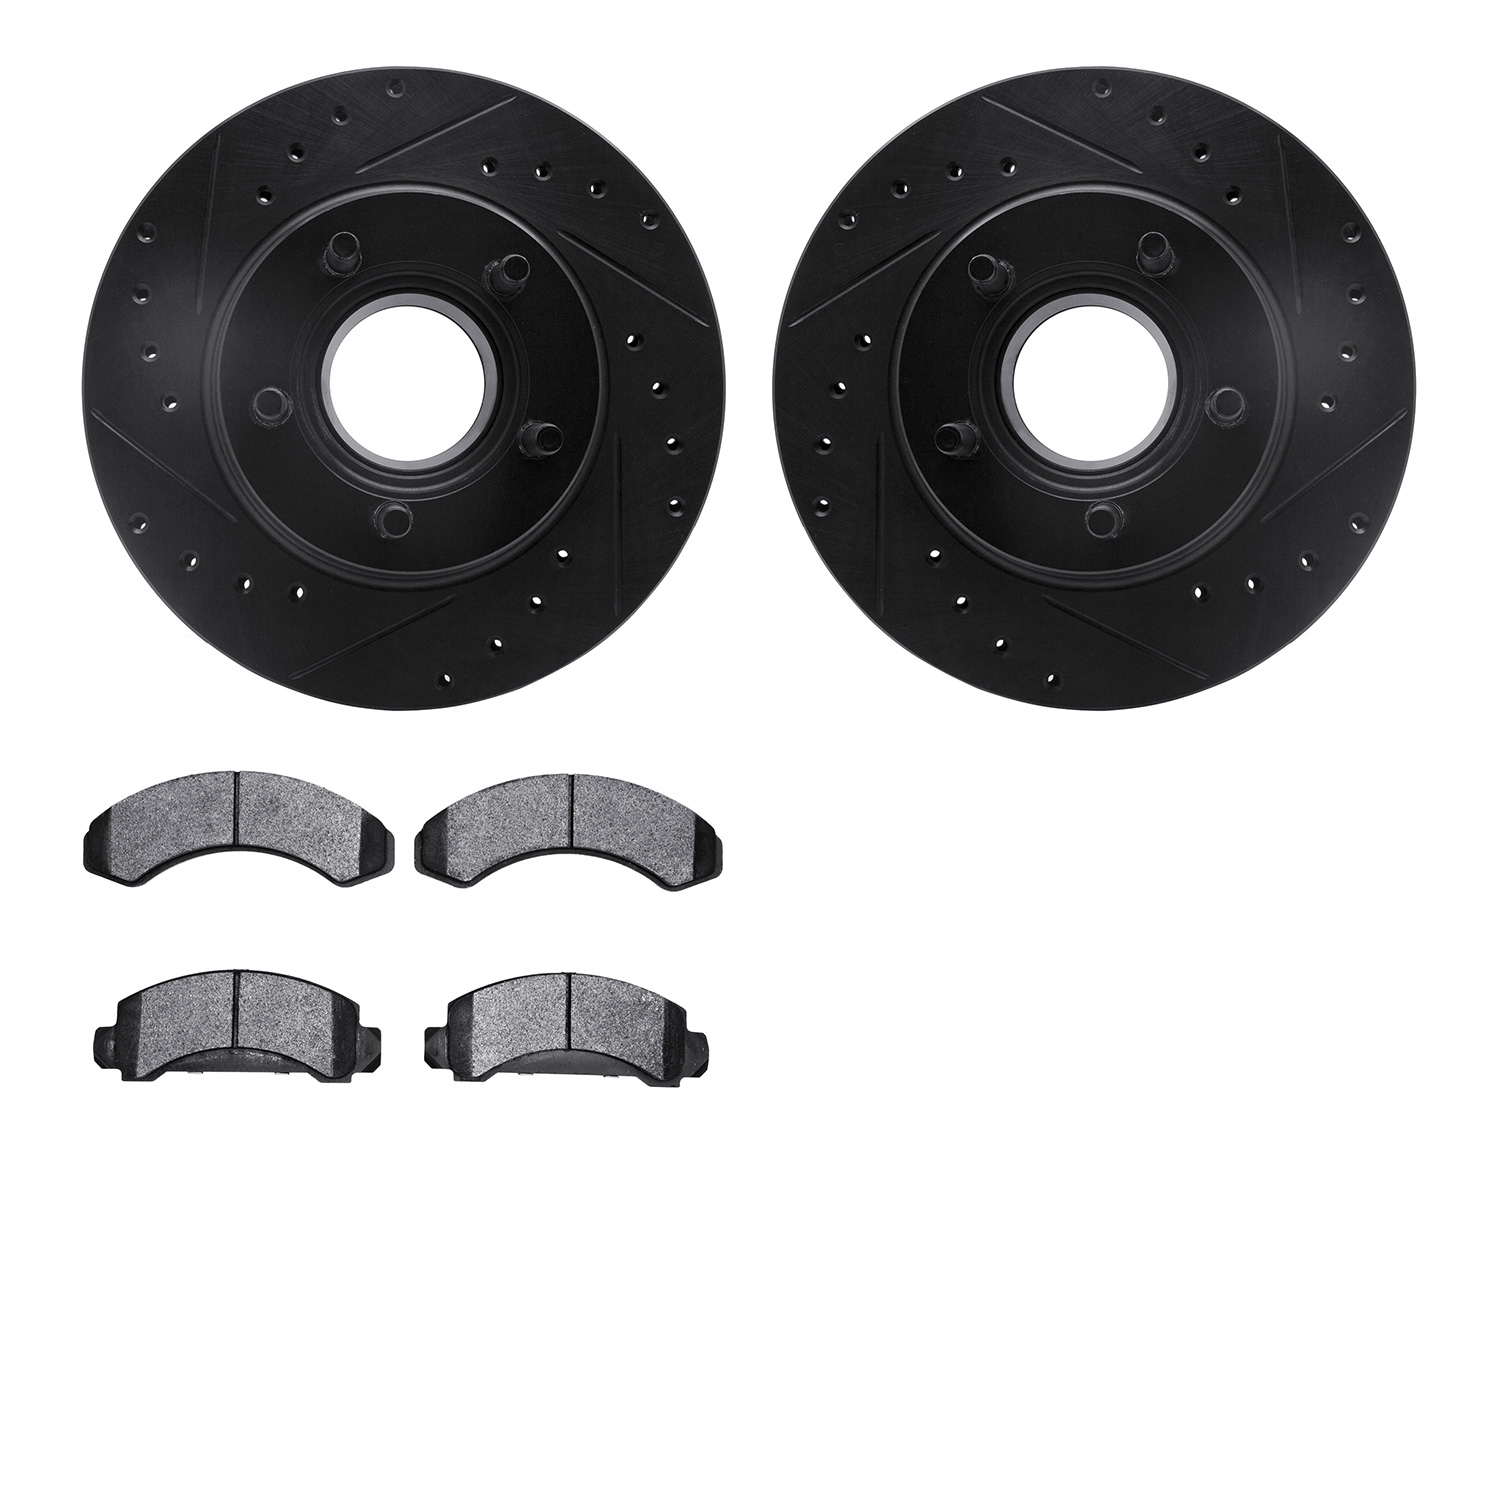 8402-54020 Drilled/Slotted Brake Rotors with Ultimate-Duty Brake Pads Kit [Black], 1993-1994 Ford/Lincoln/Mercury/Mazda, Positio